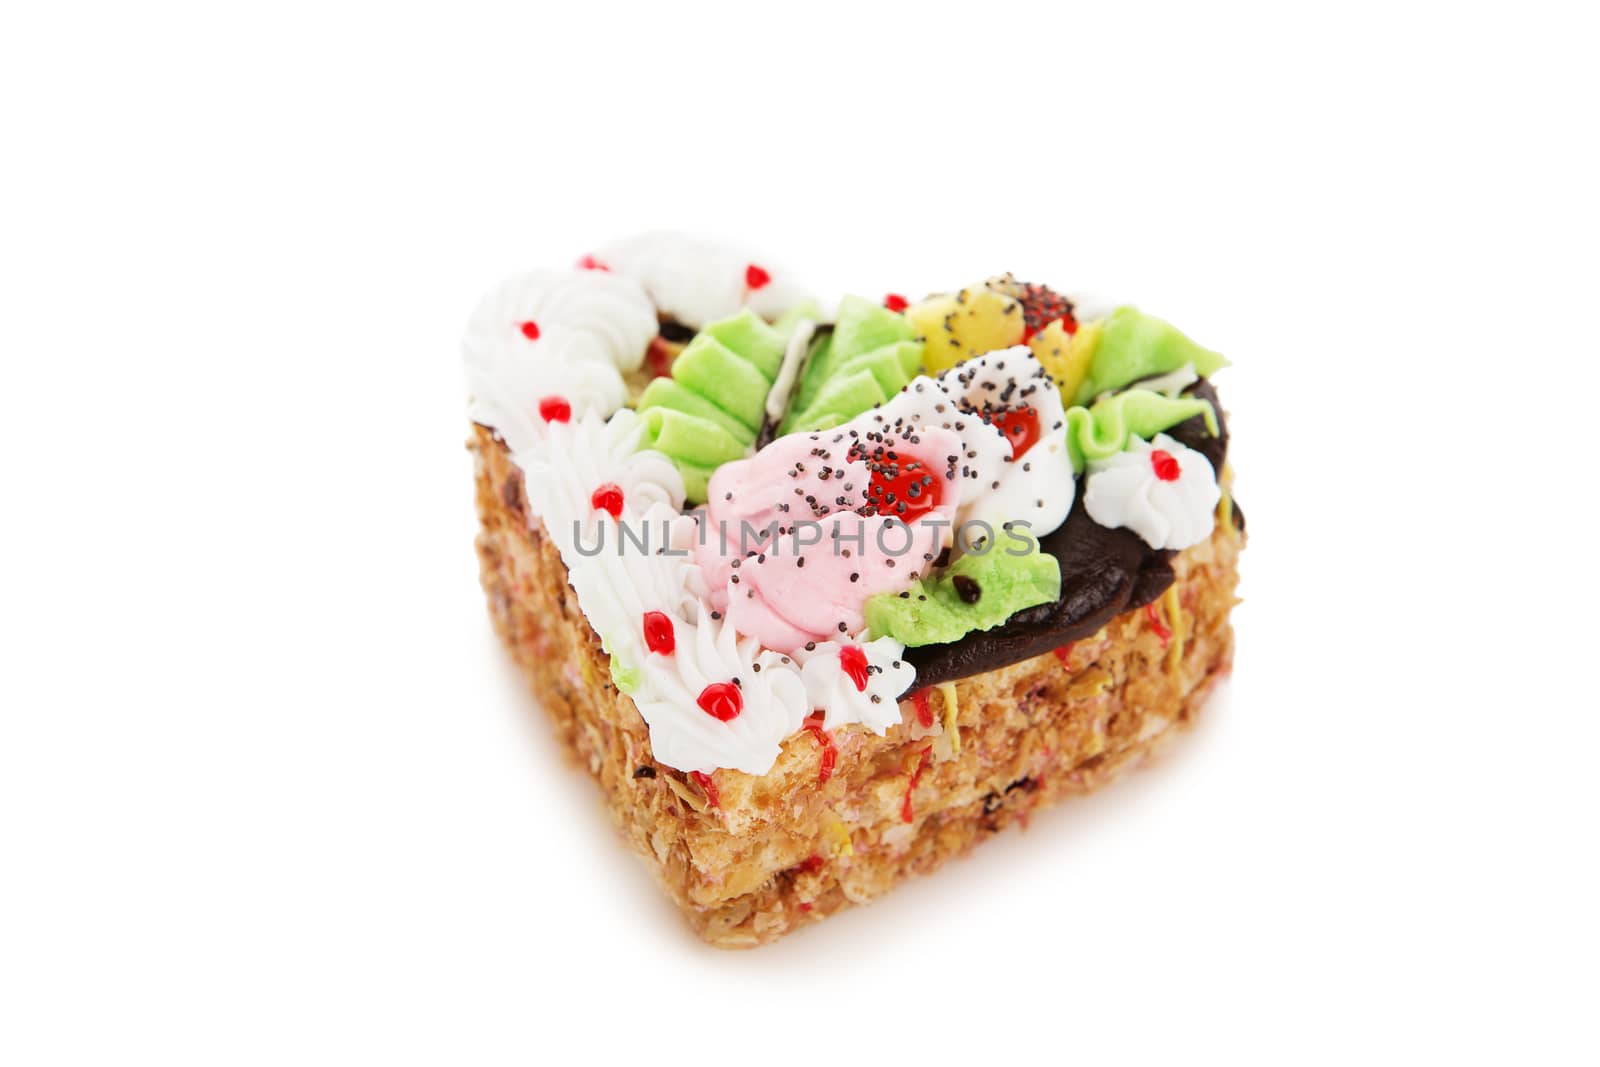 Chocolate cake in the shape of heart decorated with cream flowers isolated on white background. Confectionery, confection, pastry